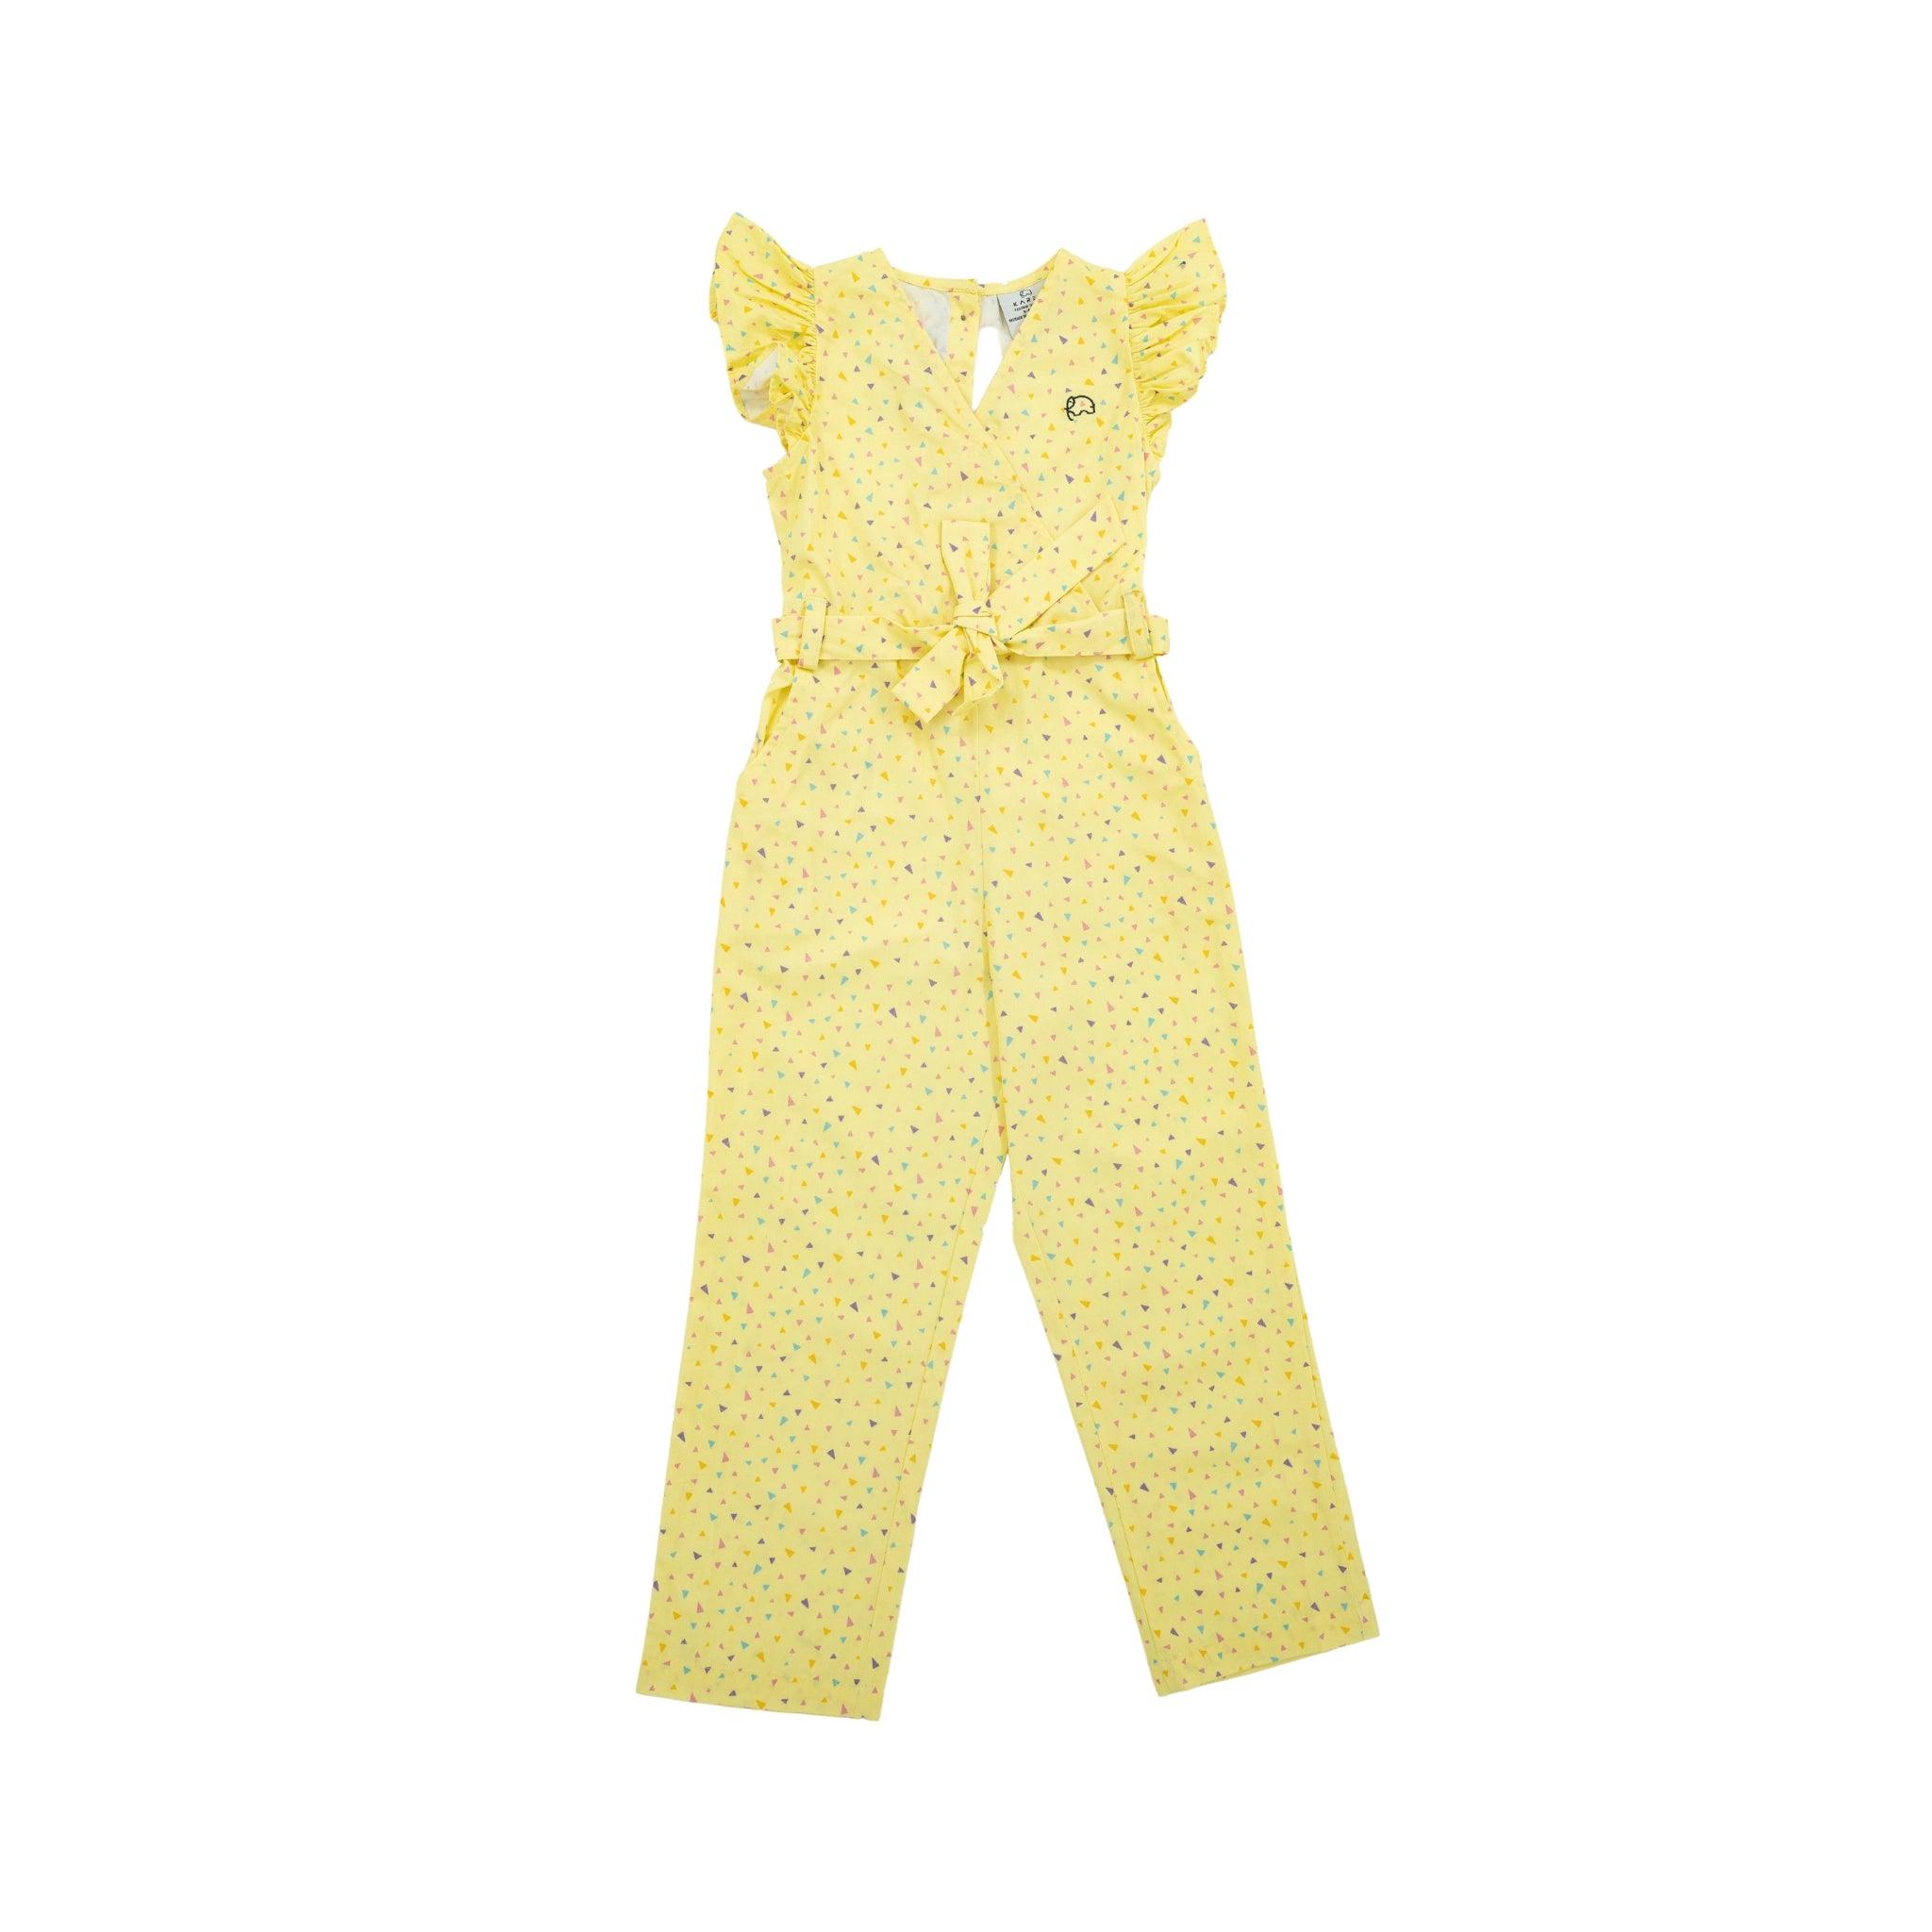 Lemon Meringue Cotton V-Neck Jumpsuit for Girls by Karee with a belted waist, ruffled sleeves, and a polka dot pattern displayed on a white background.